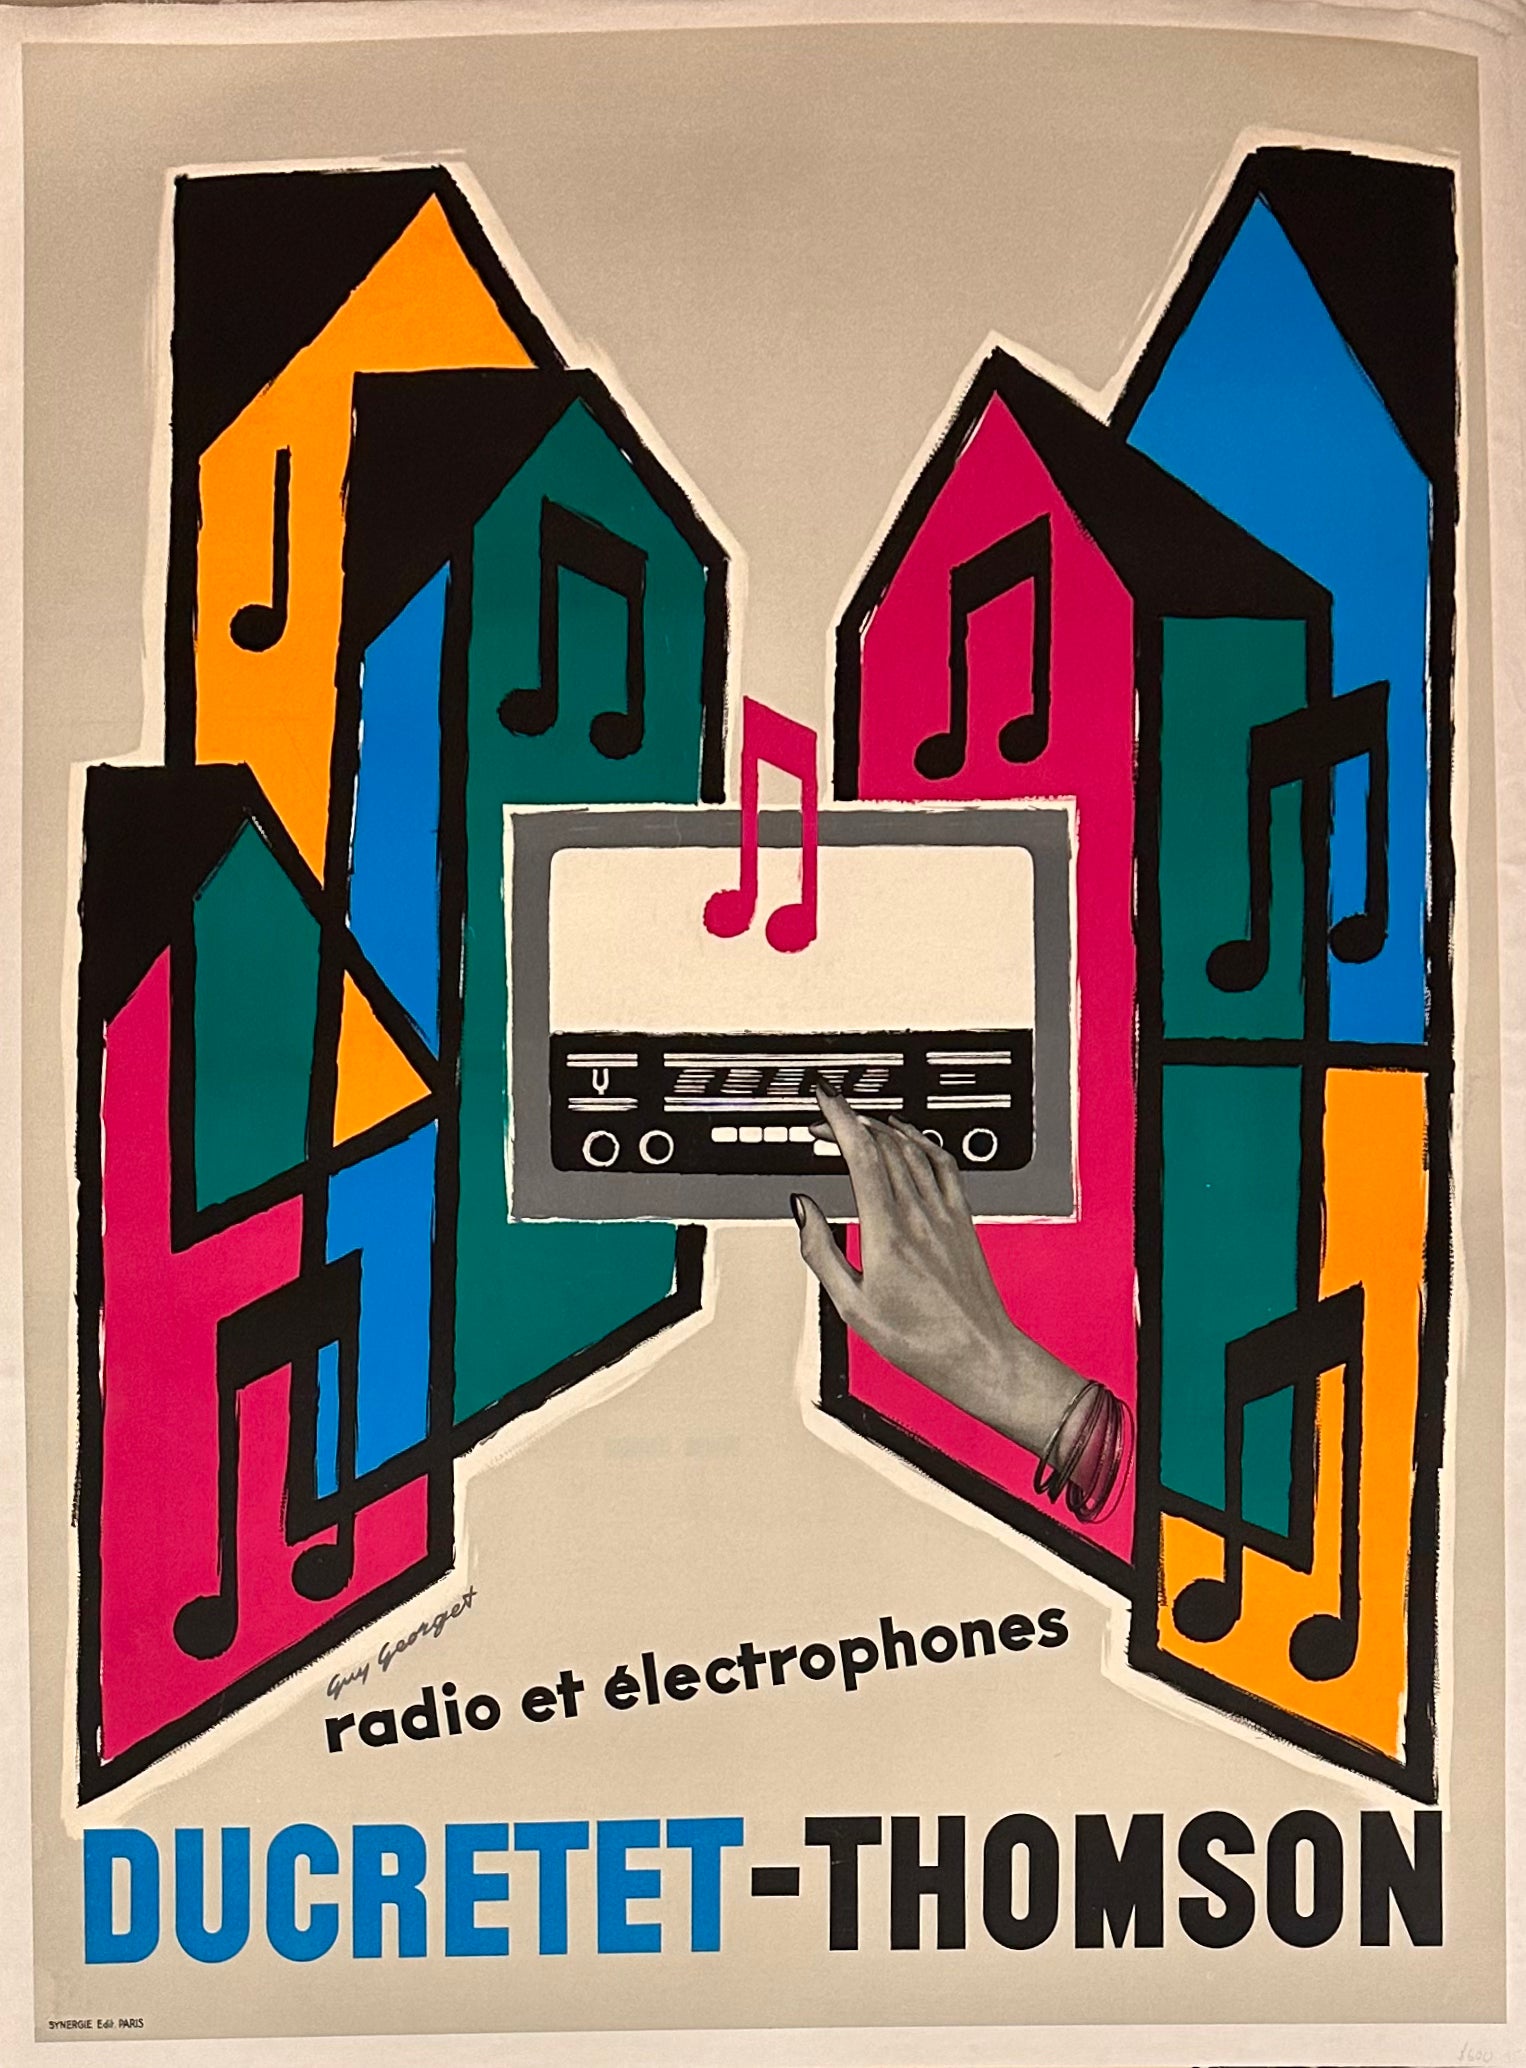 Ducretet-Thomson was a French electronics company that specialized in the production of radios and other electronic devices, and this poster serves as an excellent illustration of their advertising efforts for promoting their products.